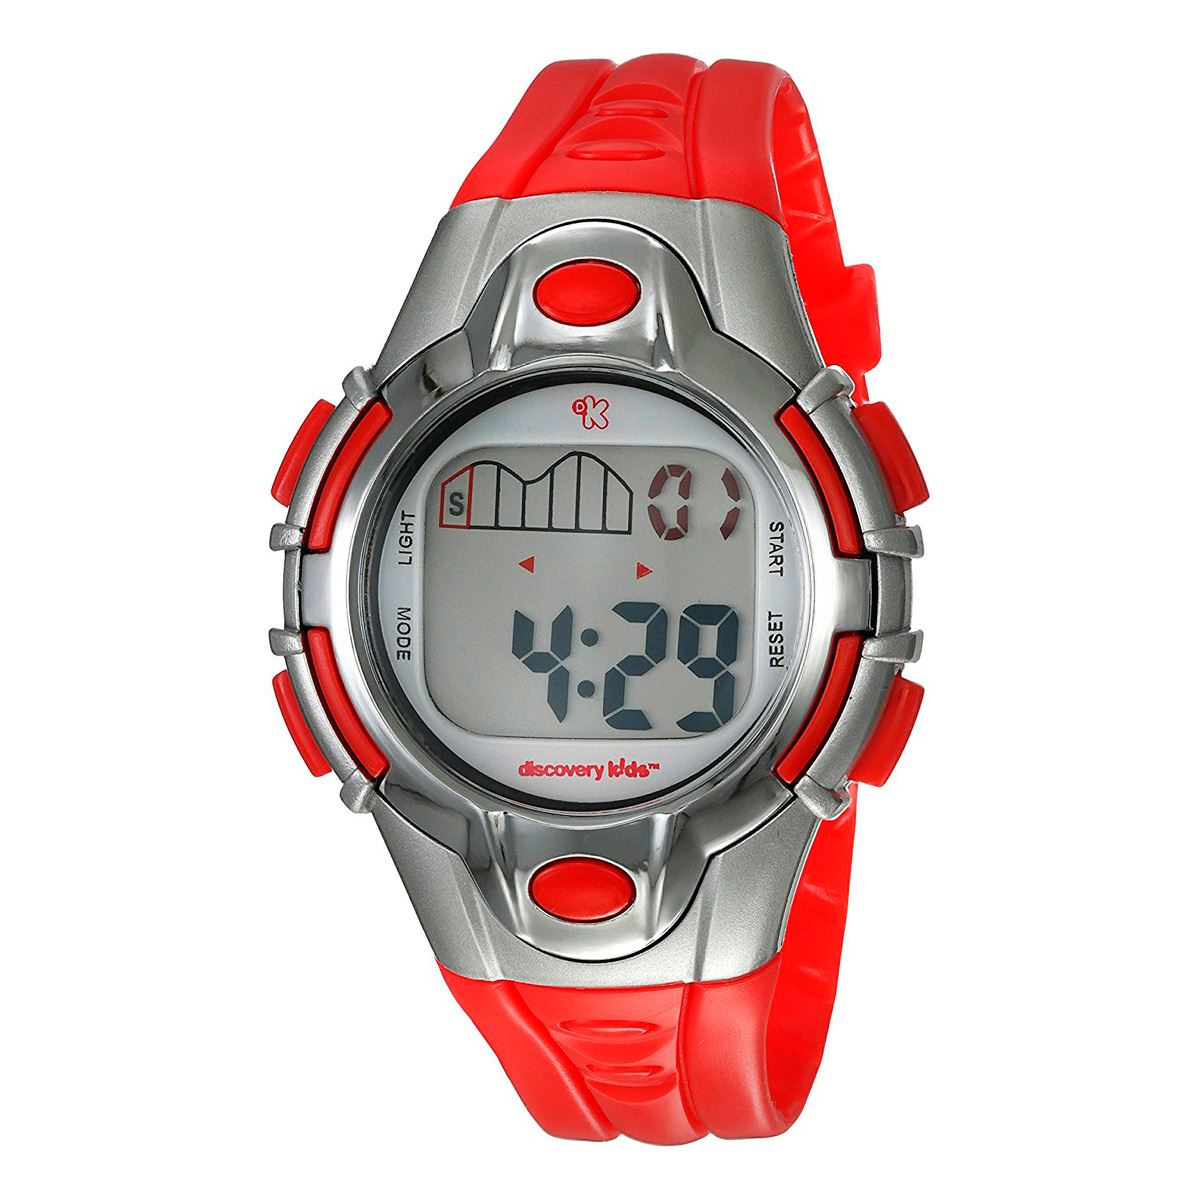 Reloj Discovery Kids DKID 8101 A Red